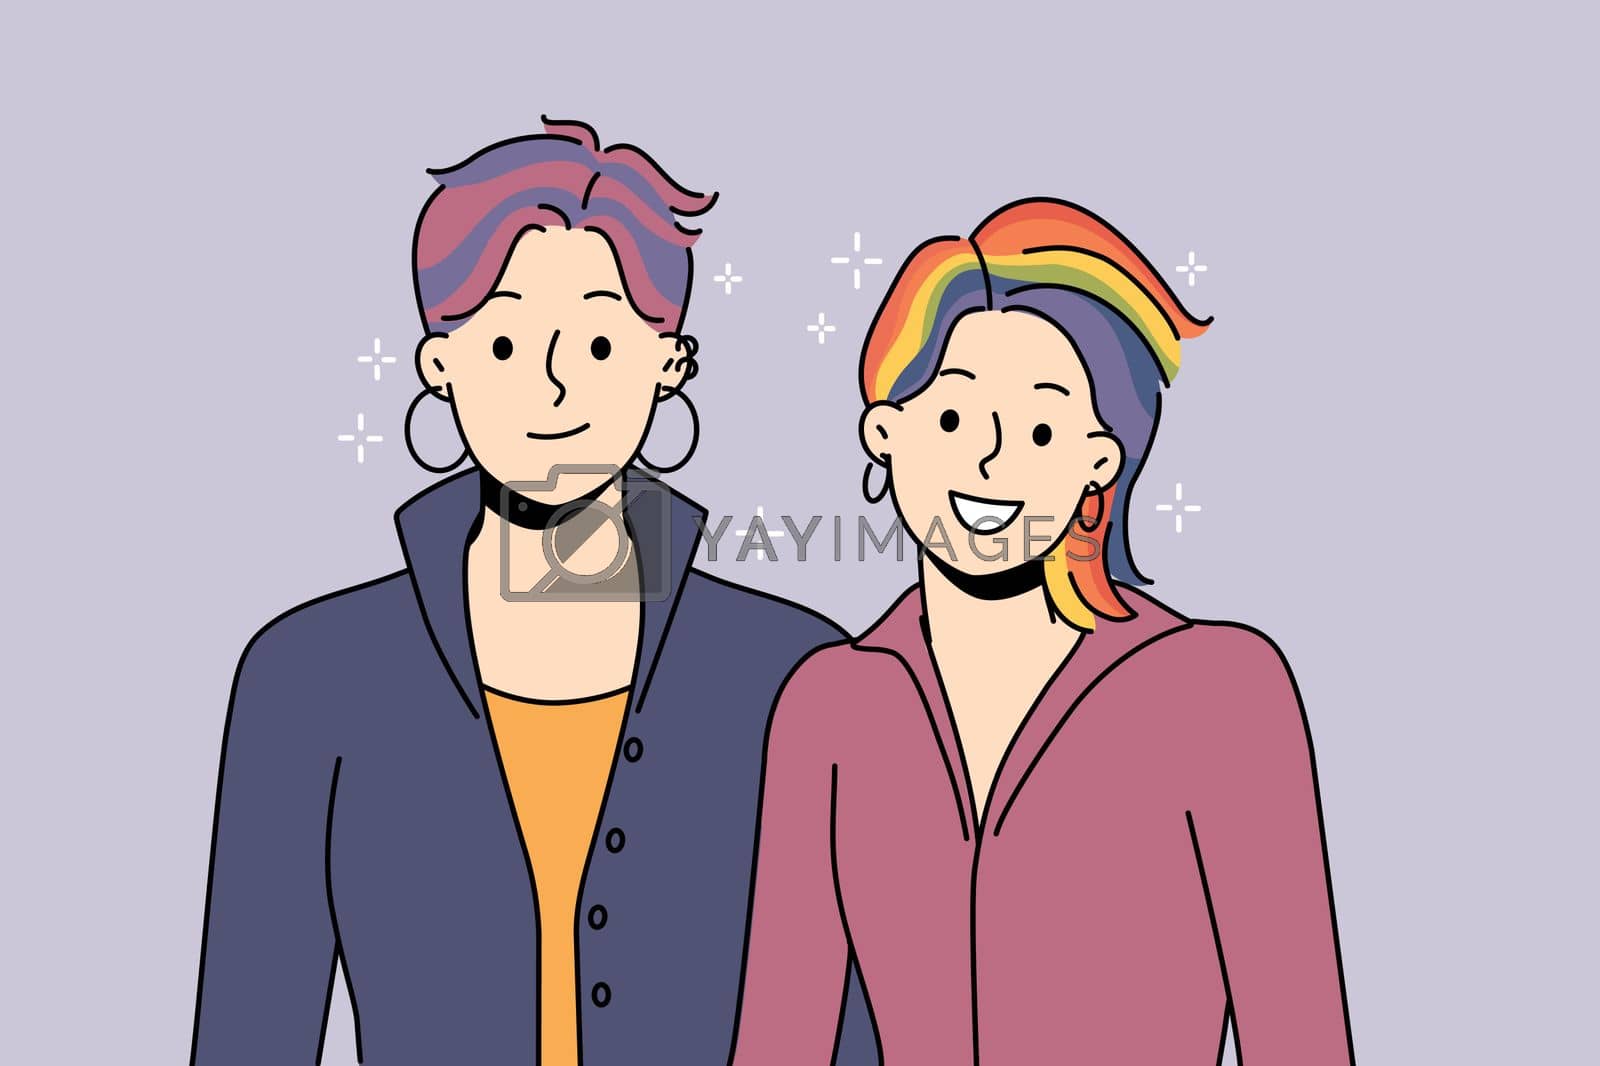 Royalty free image of Smiling people with colorful hair by VECTORIUM